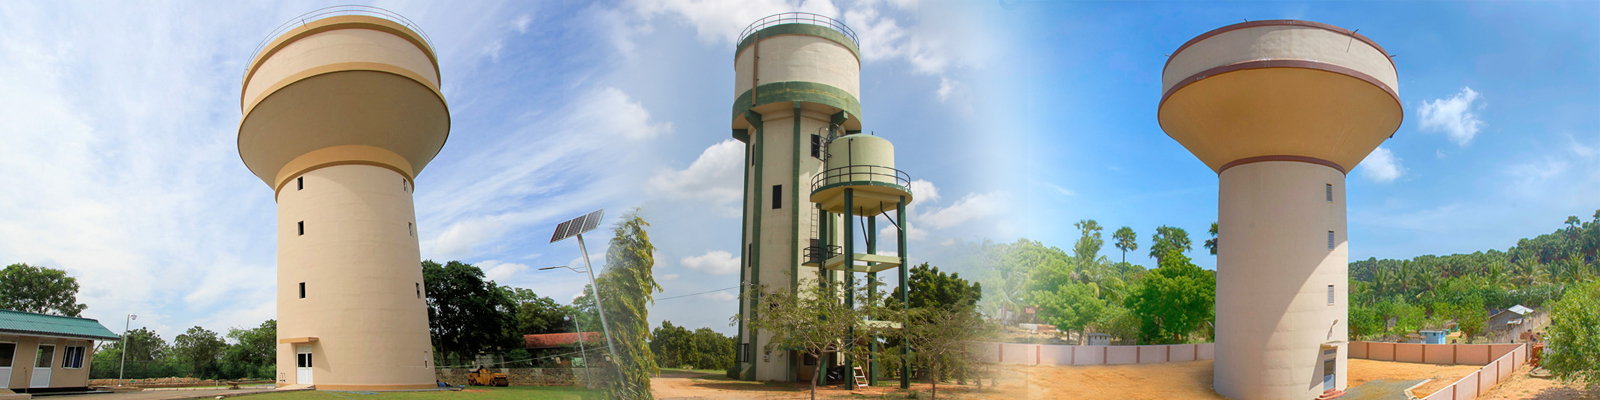 Water Tank Cleaning Services in Chandigarh @MaxCleaner